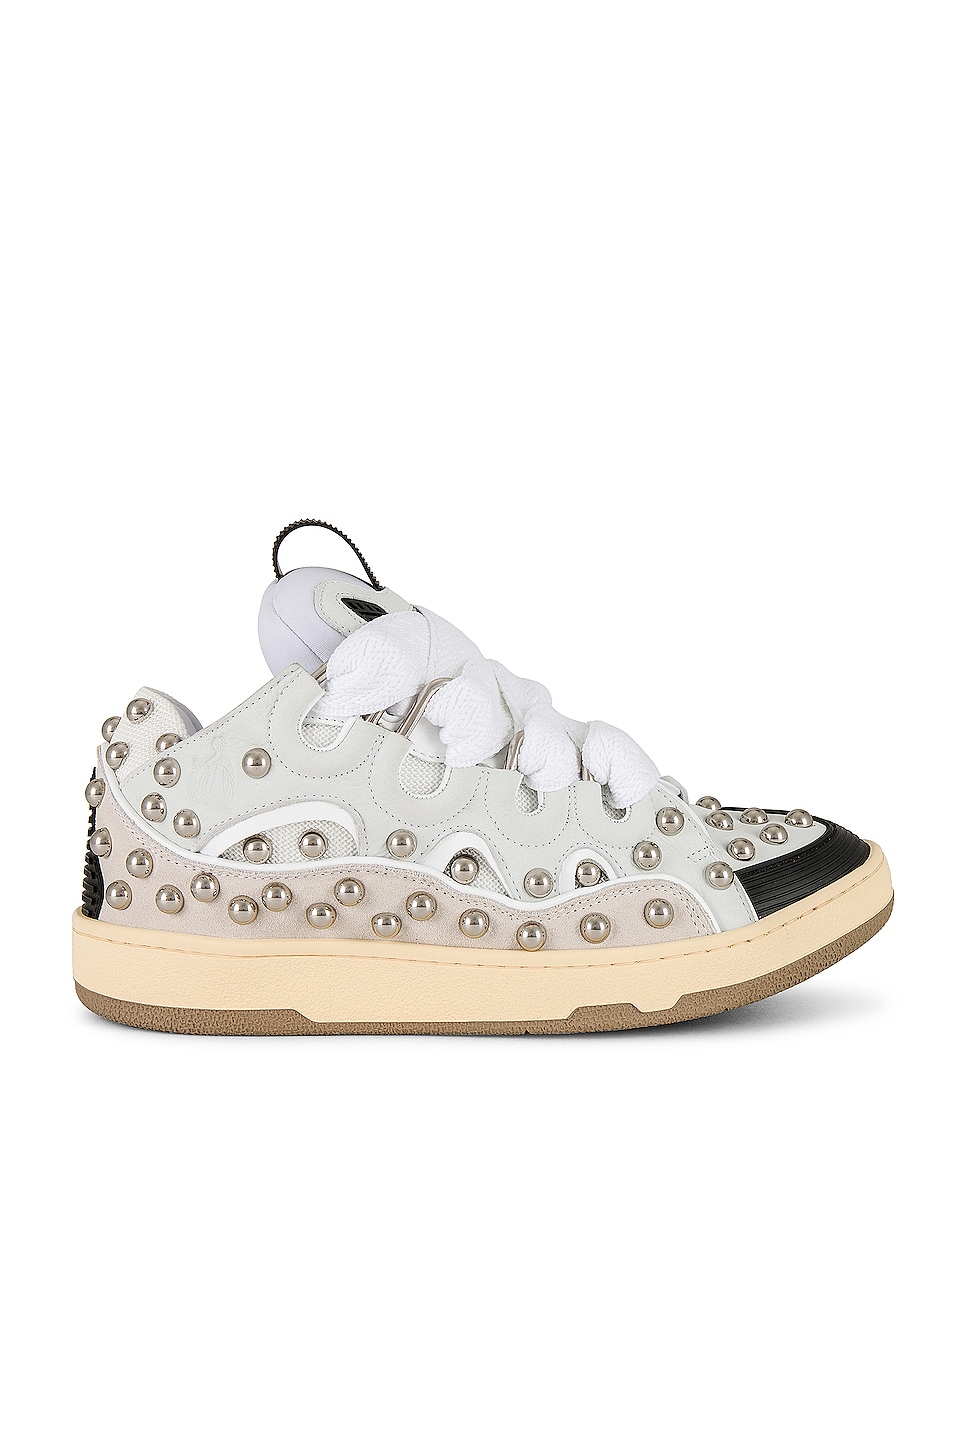 Image 1 of Lanvin Stud Curb Sneaker in White